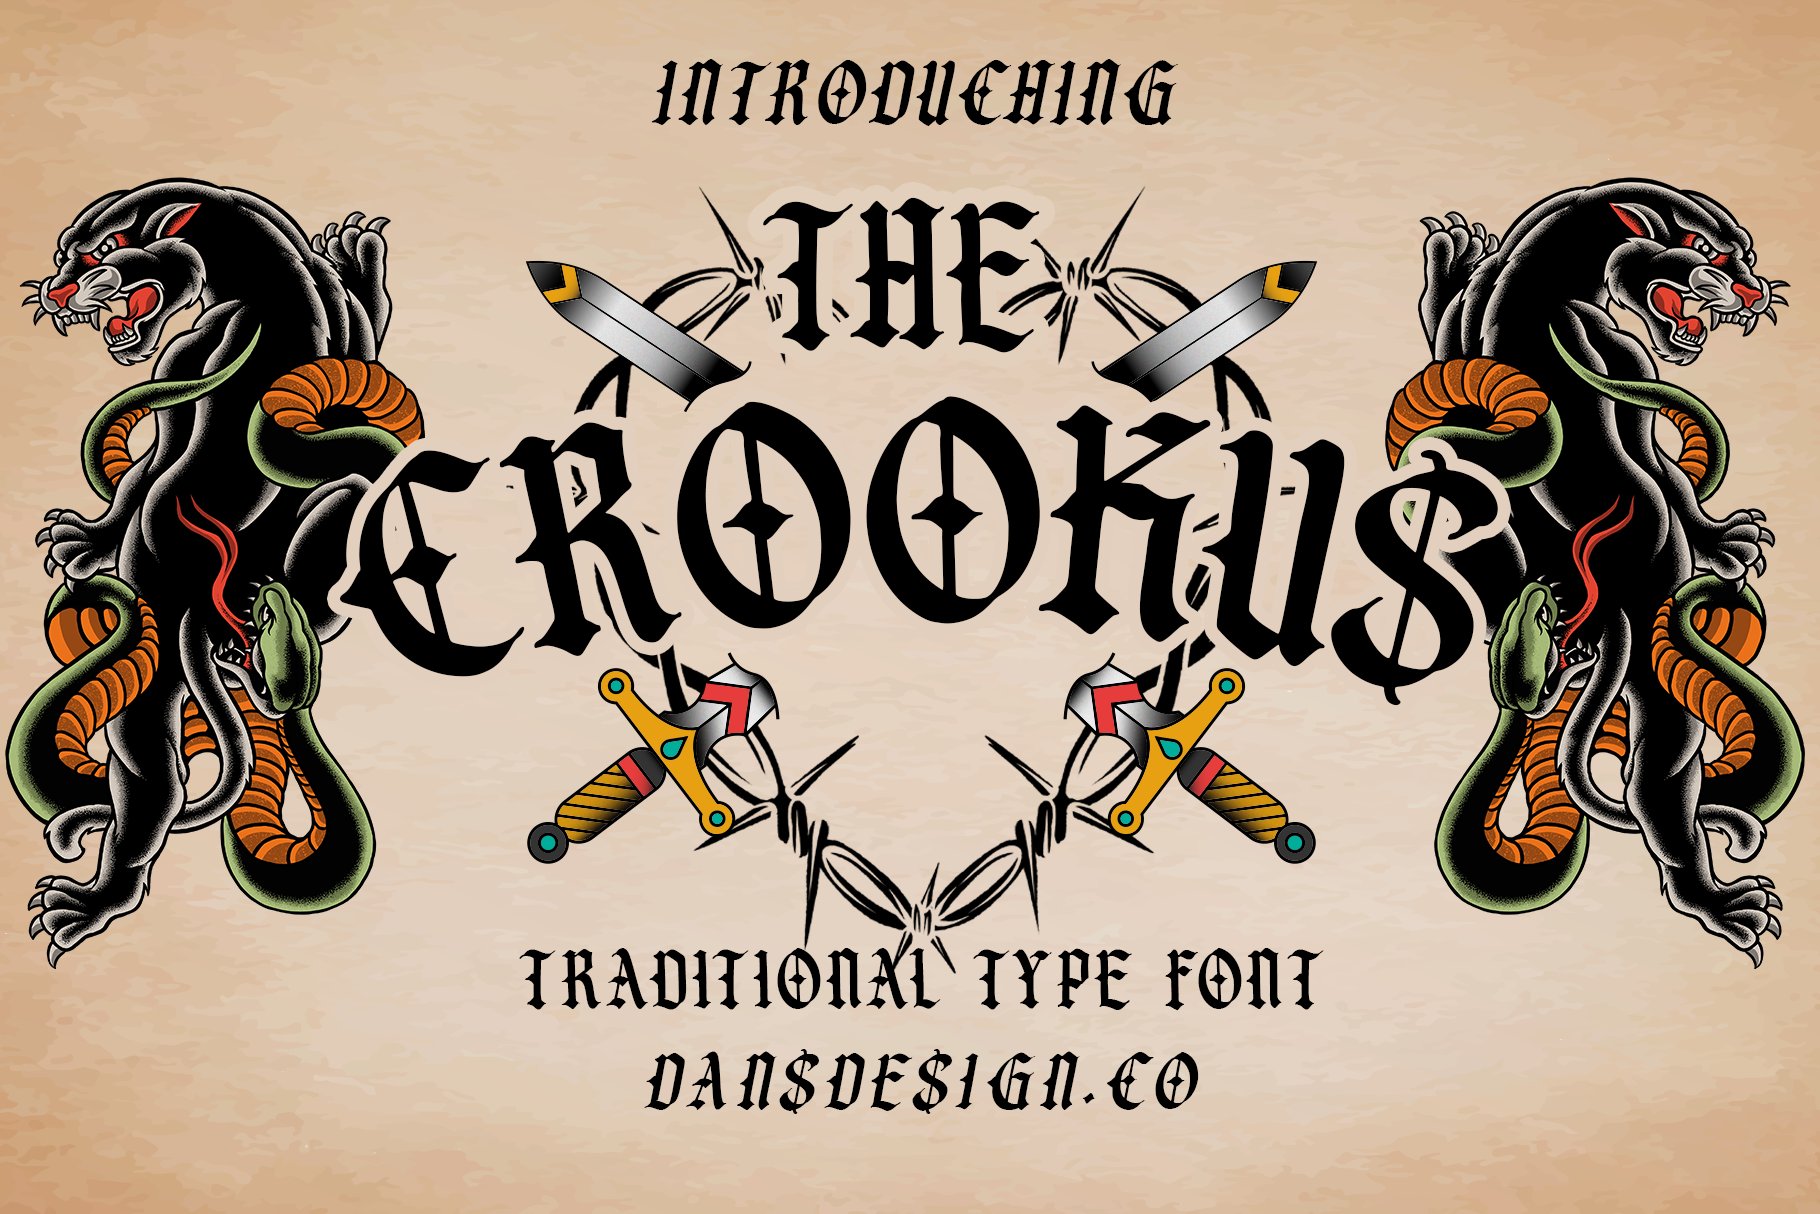 The Crookus cover image.